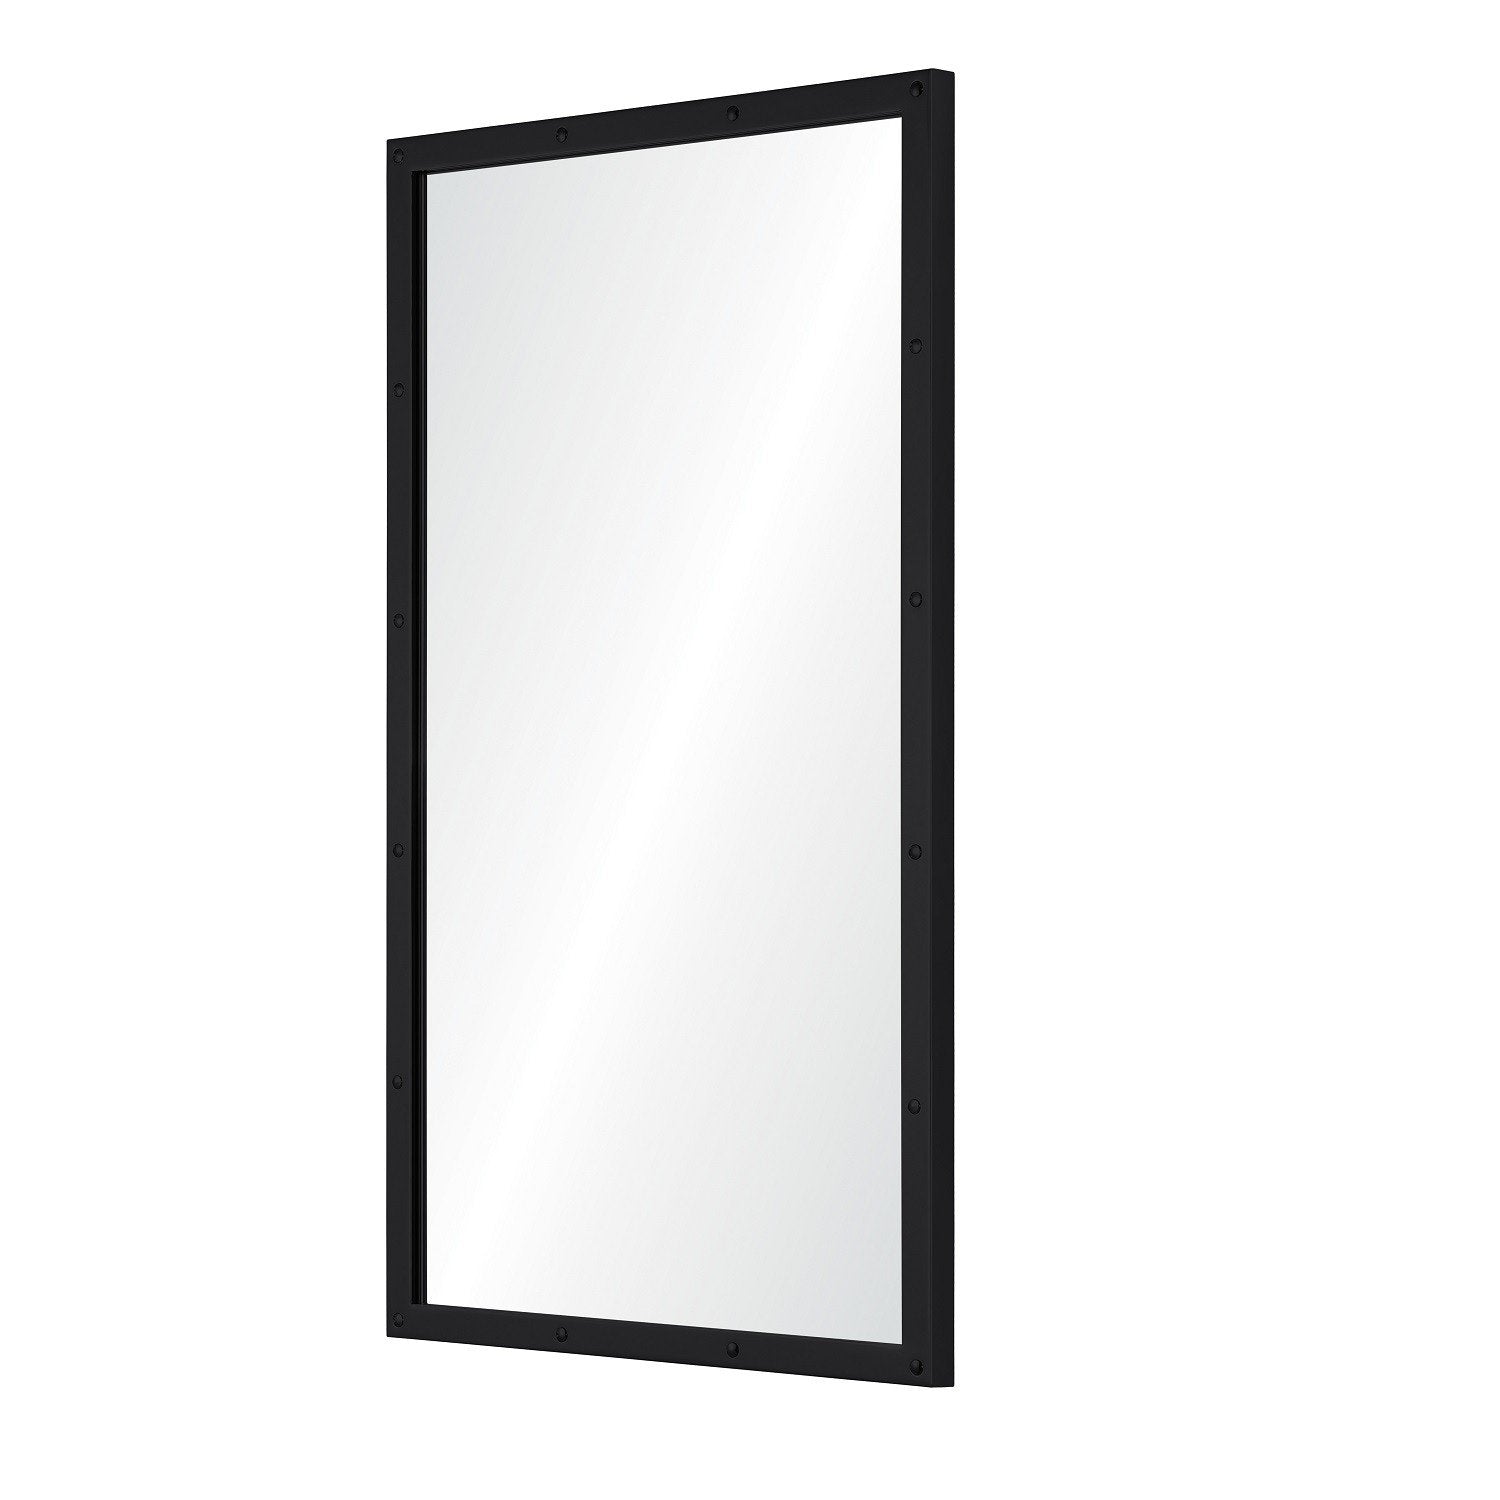 Mirror Home - Tall Black Nickel Wall Mirror by Suzanne Kasler - Fig Linens -Side